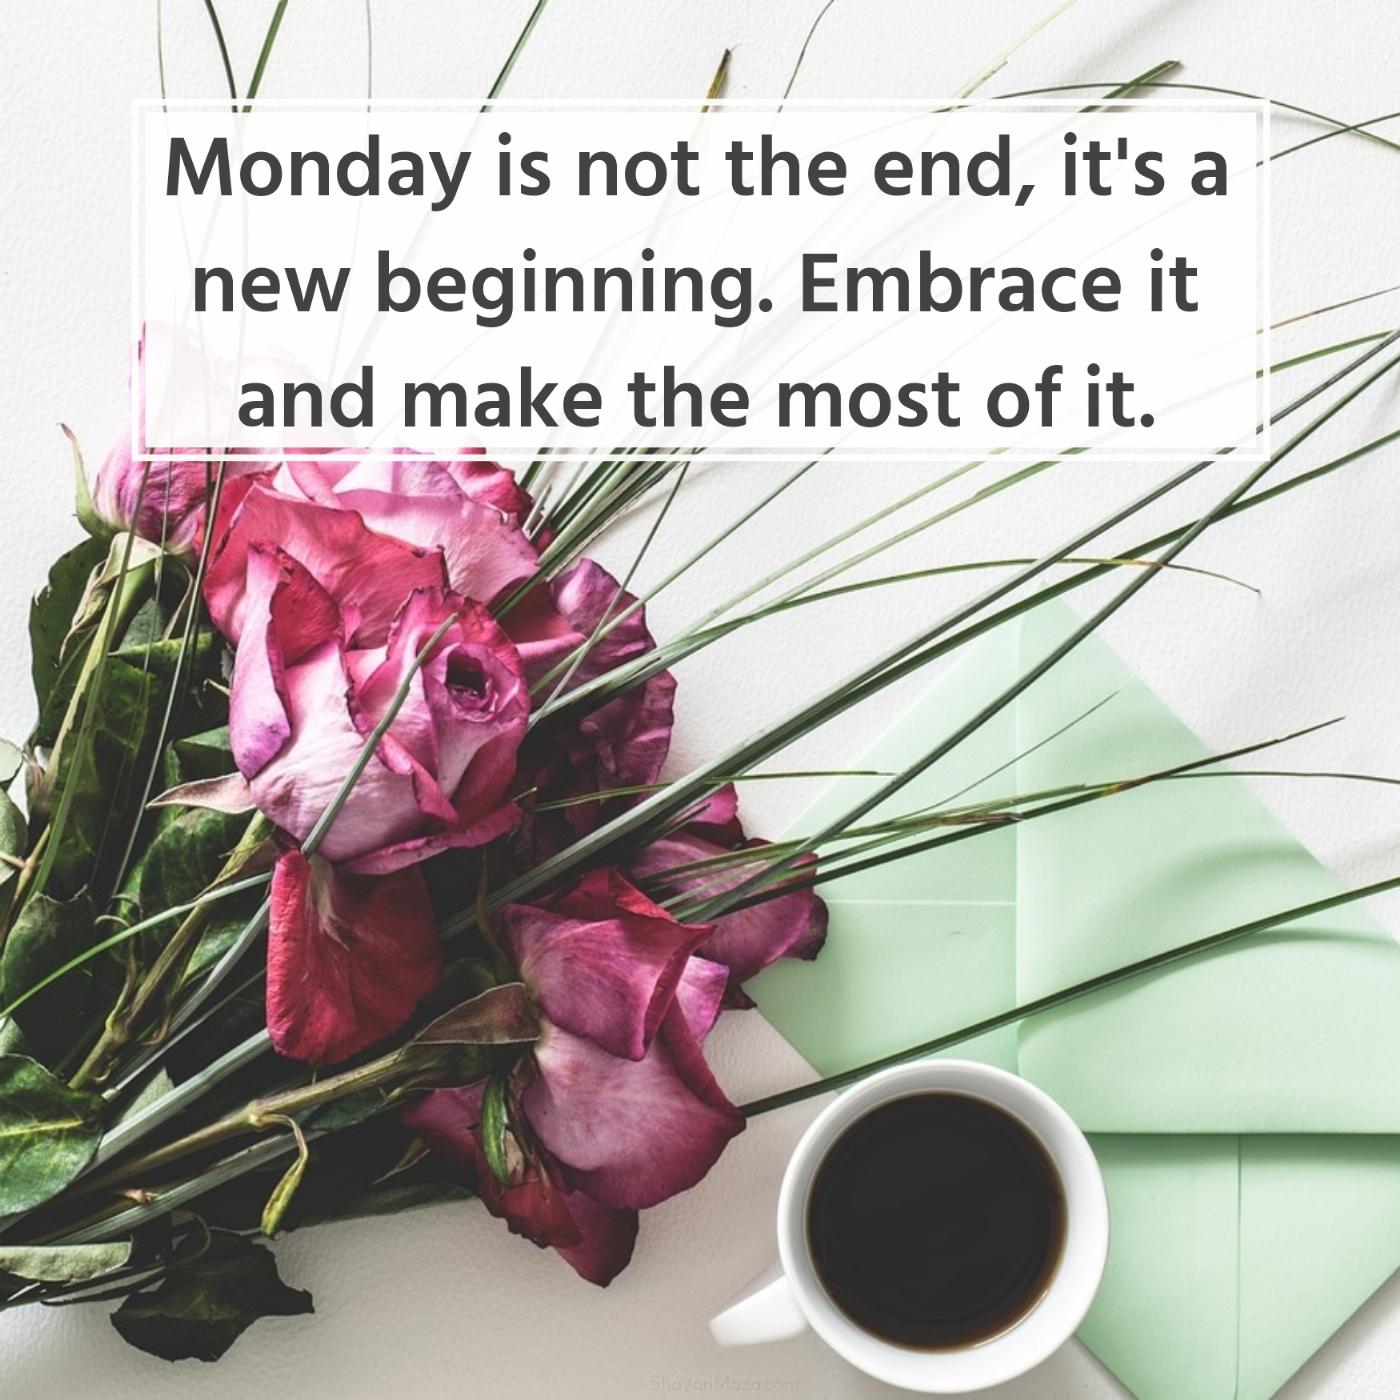 Monday is not the end it's a new beginning